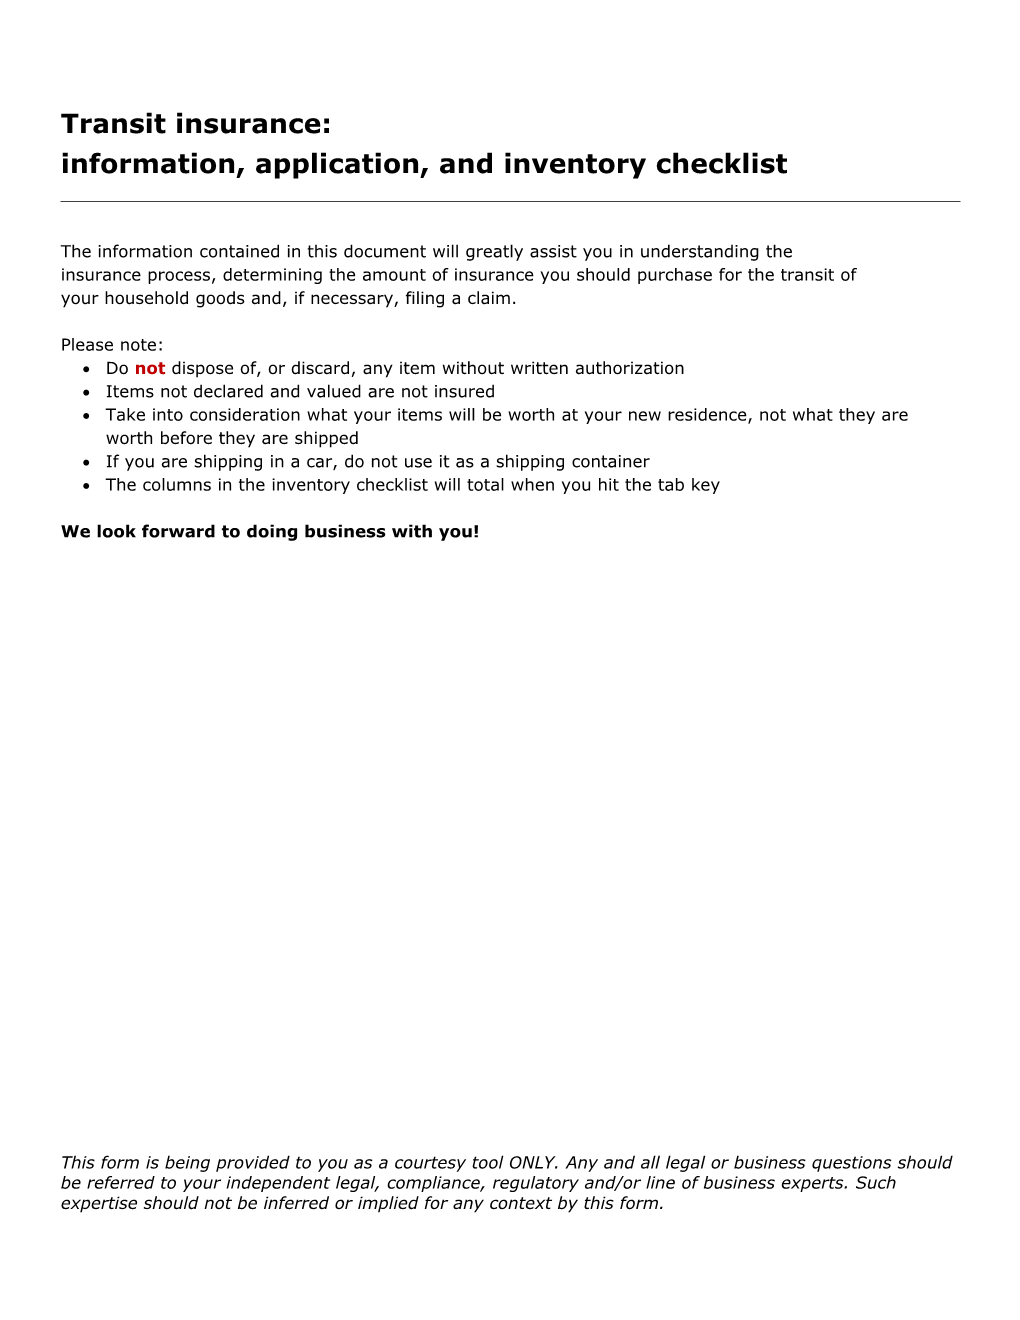 Information, Application, and Inventory Checklist